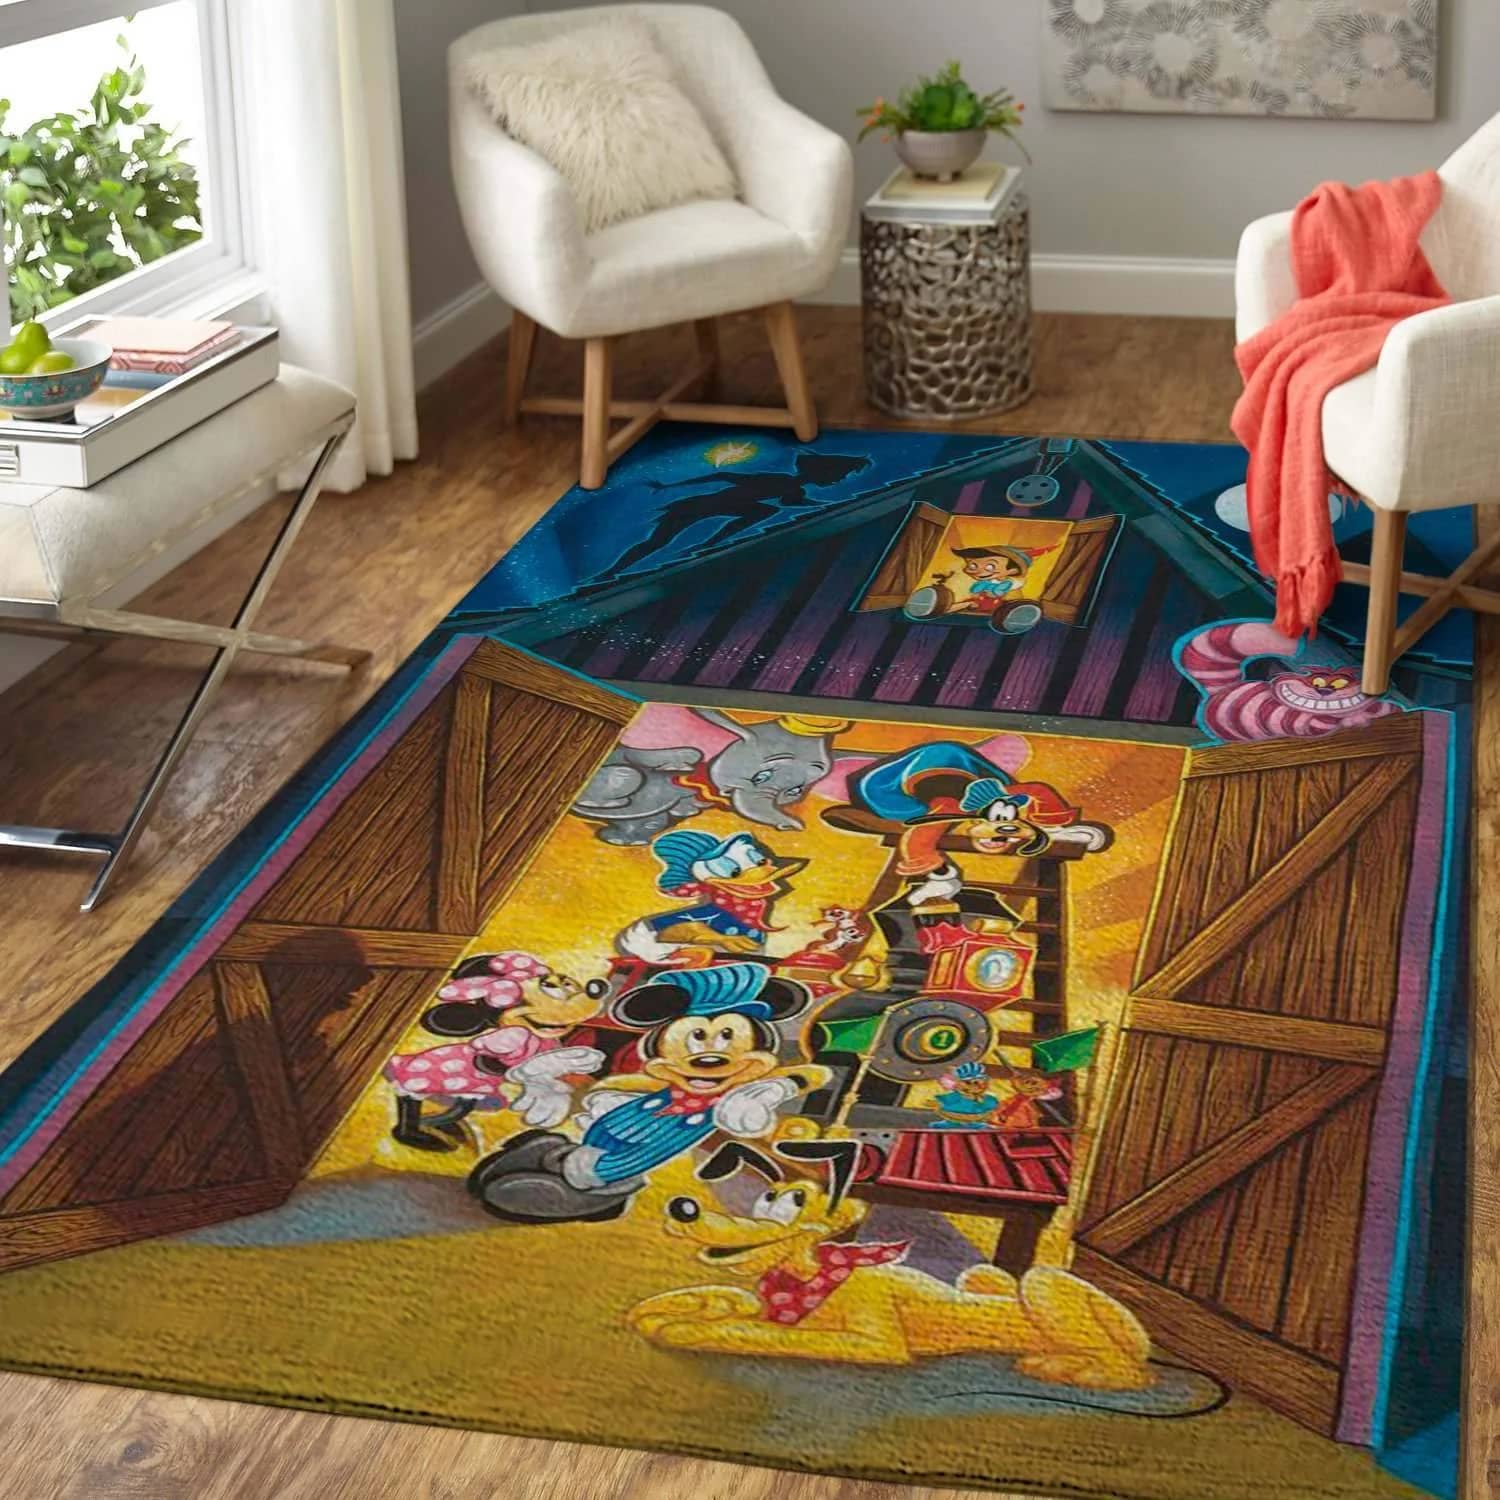 Disney Movie Fans Mickey Mouse Area Limited Edition Amazon Best Seller Sku 263879 Rug